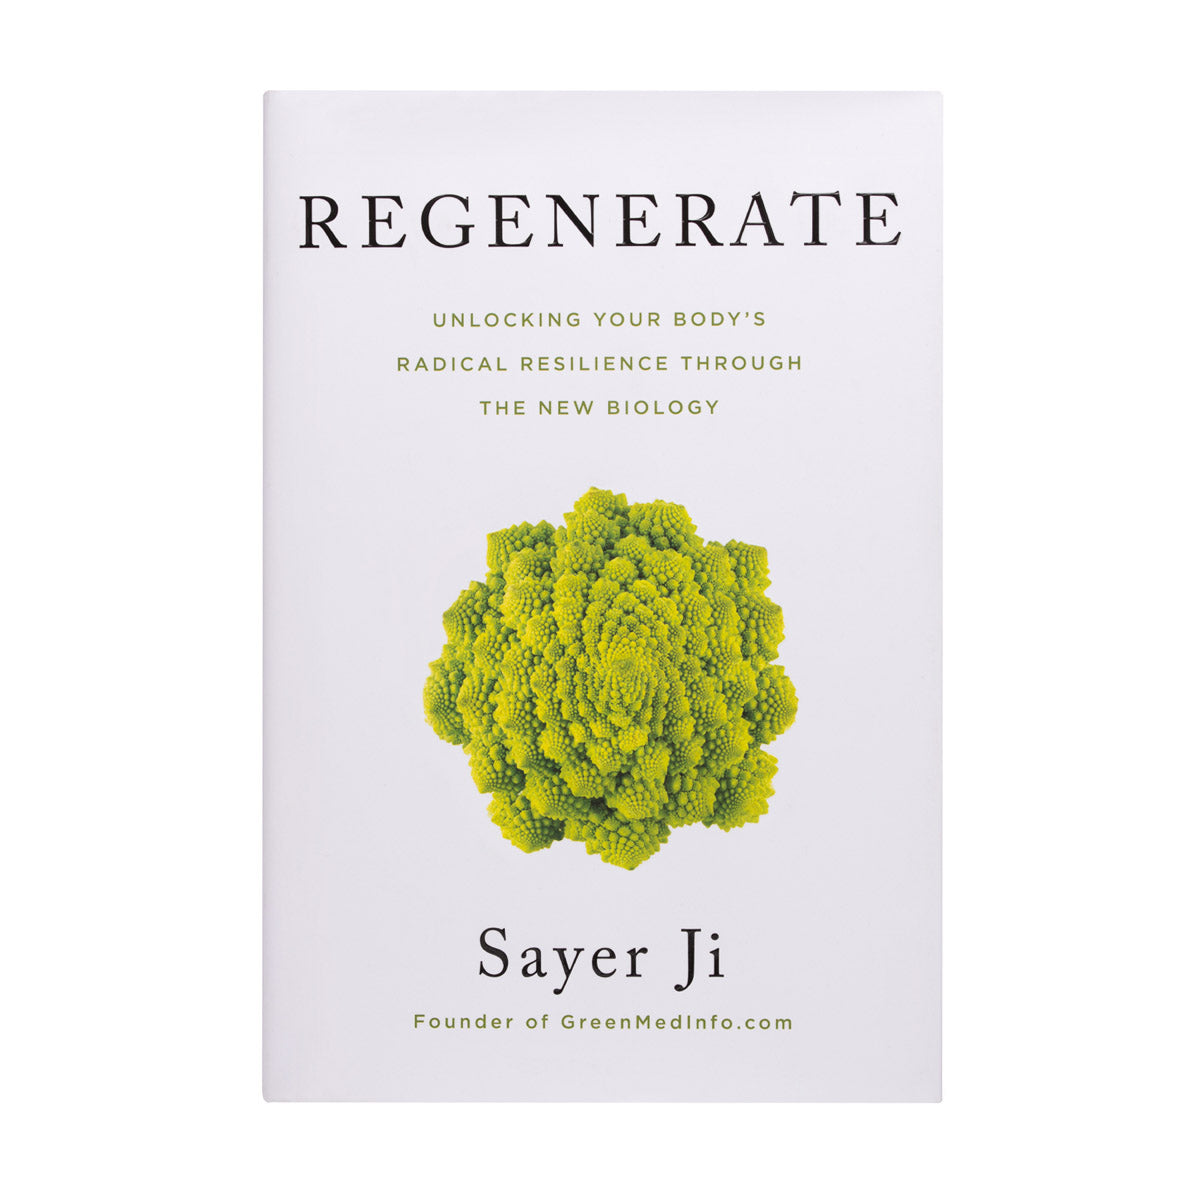 Regenerate | Sayer Ji | Raw Living UK | Books | Regenerate by Sayer Ji brings us the revelation that it is NOT our genes in the driving seat; he argues that our bodies have capacity to heal &amp; regenerate.